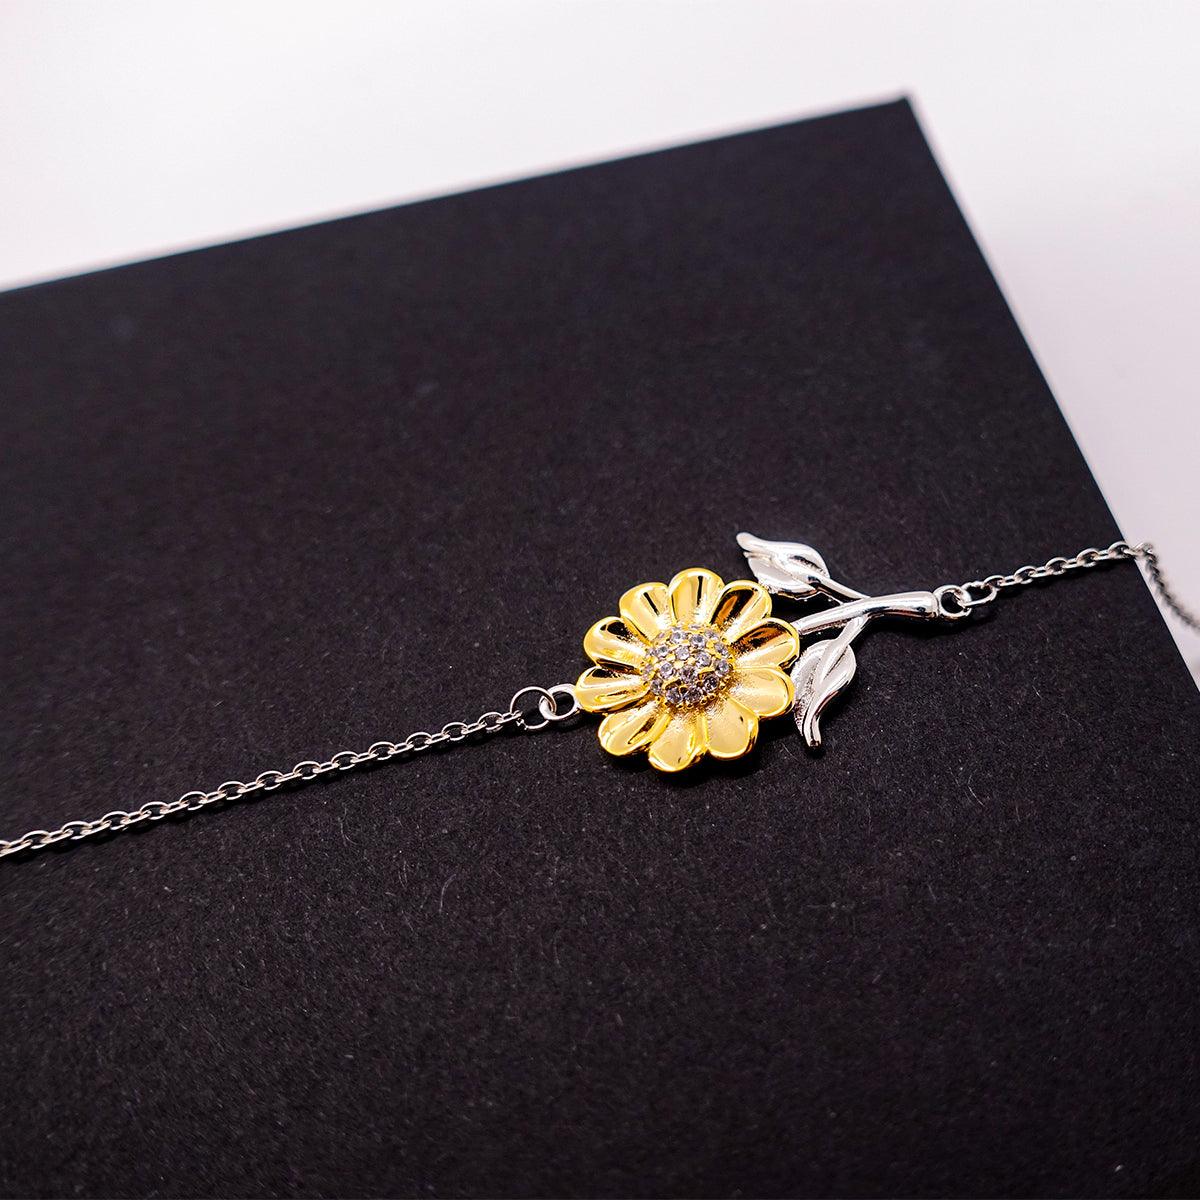 Database Administrator Sunflower Bracelet - Thanks for being who you are - Birthday Christmas Jewelry Gifts Coworkers Colleague Boss - Mallard Moon Gift Shop